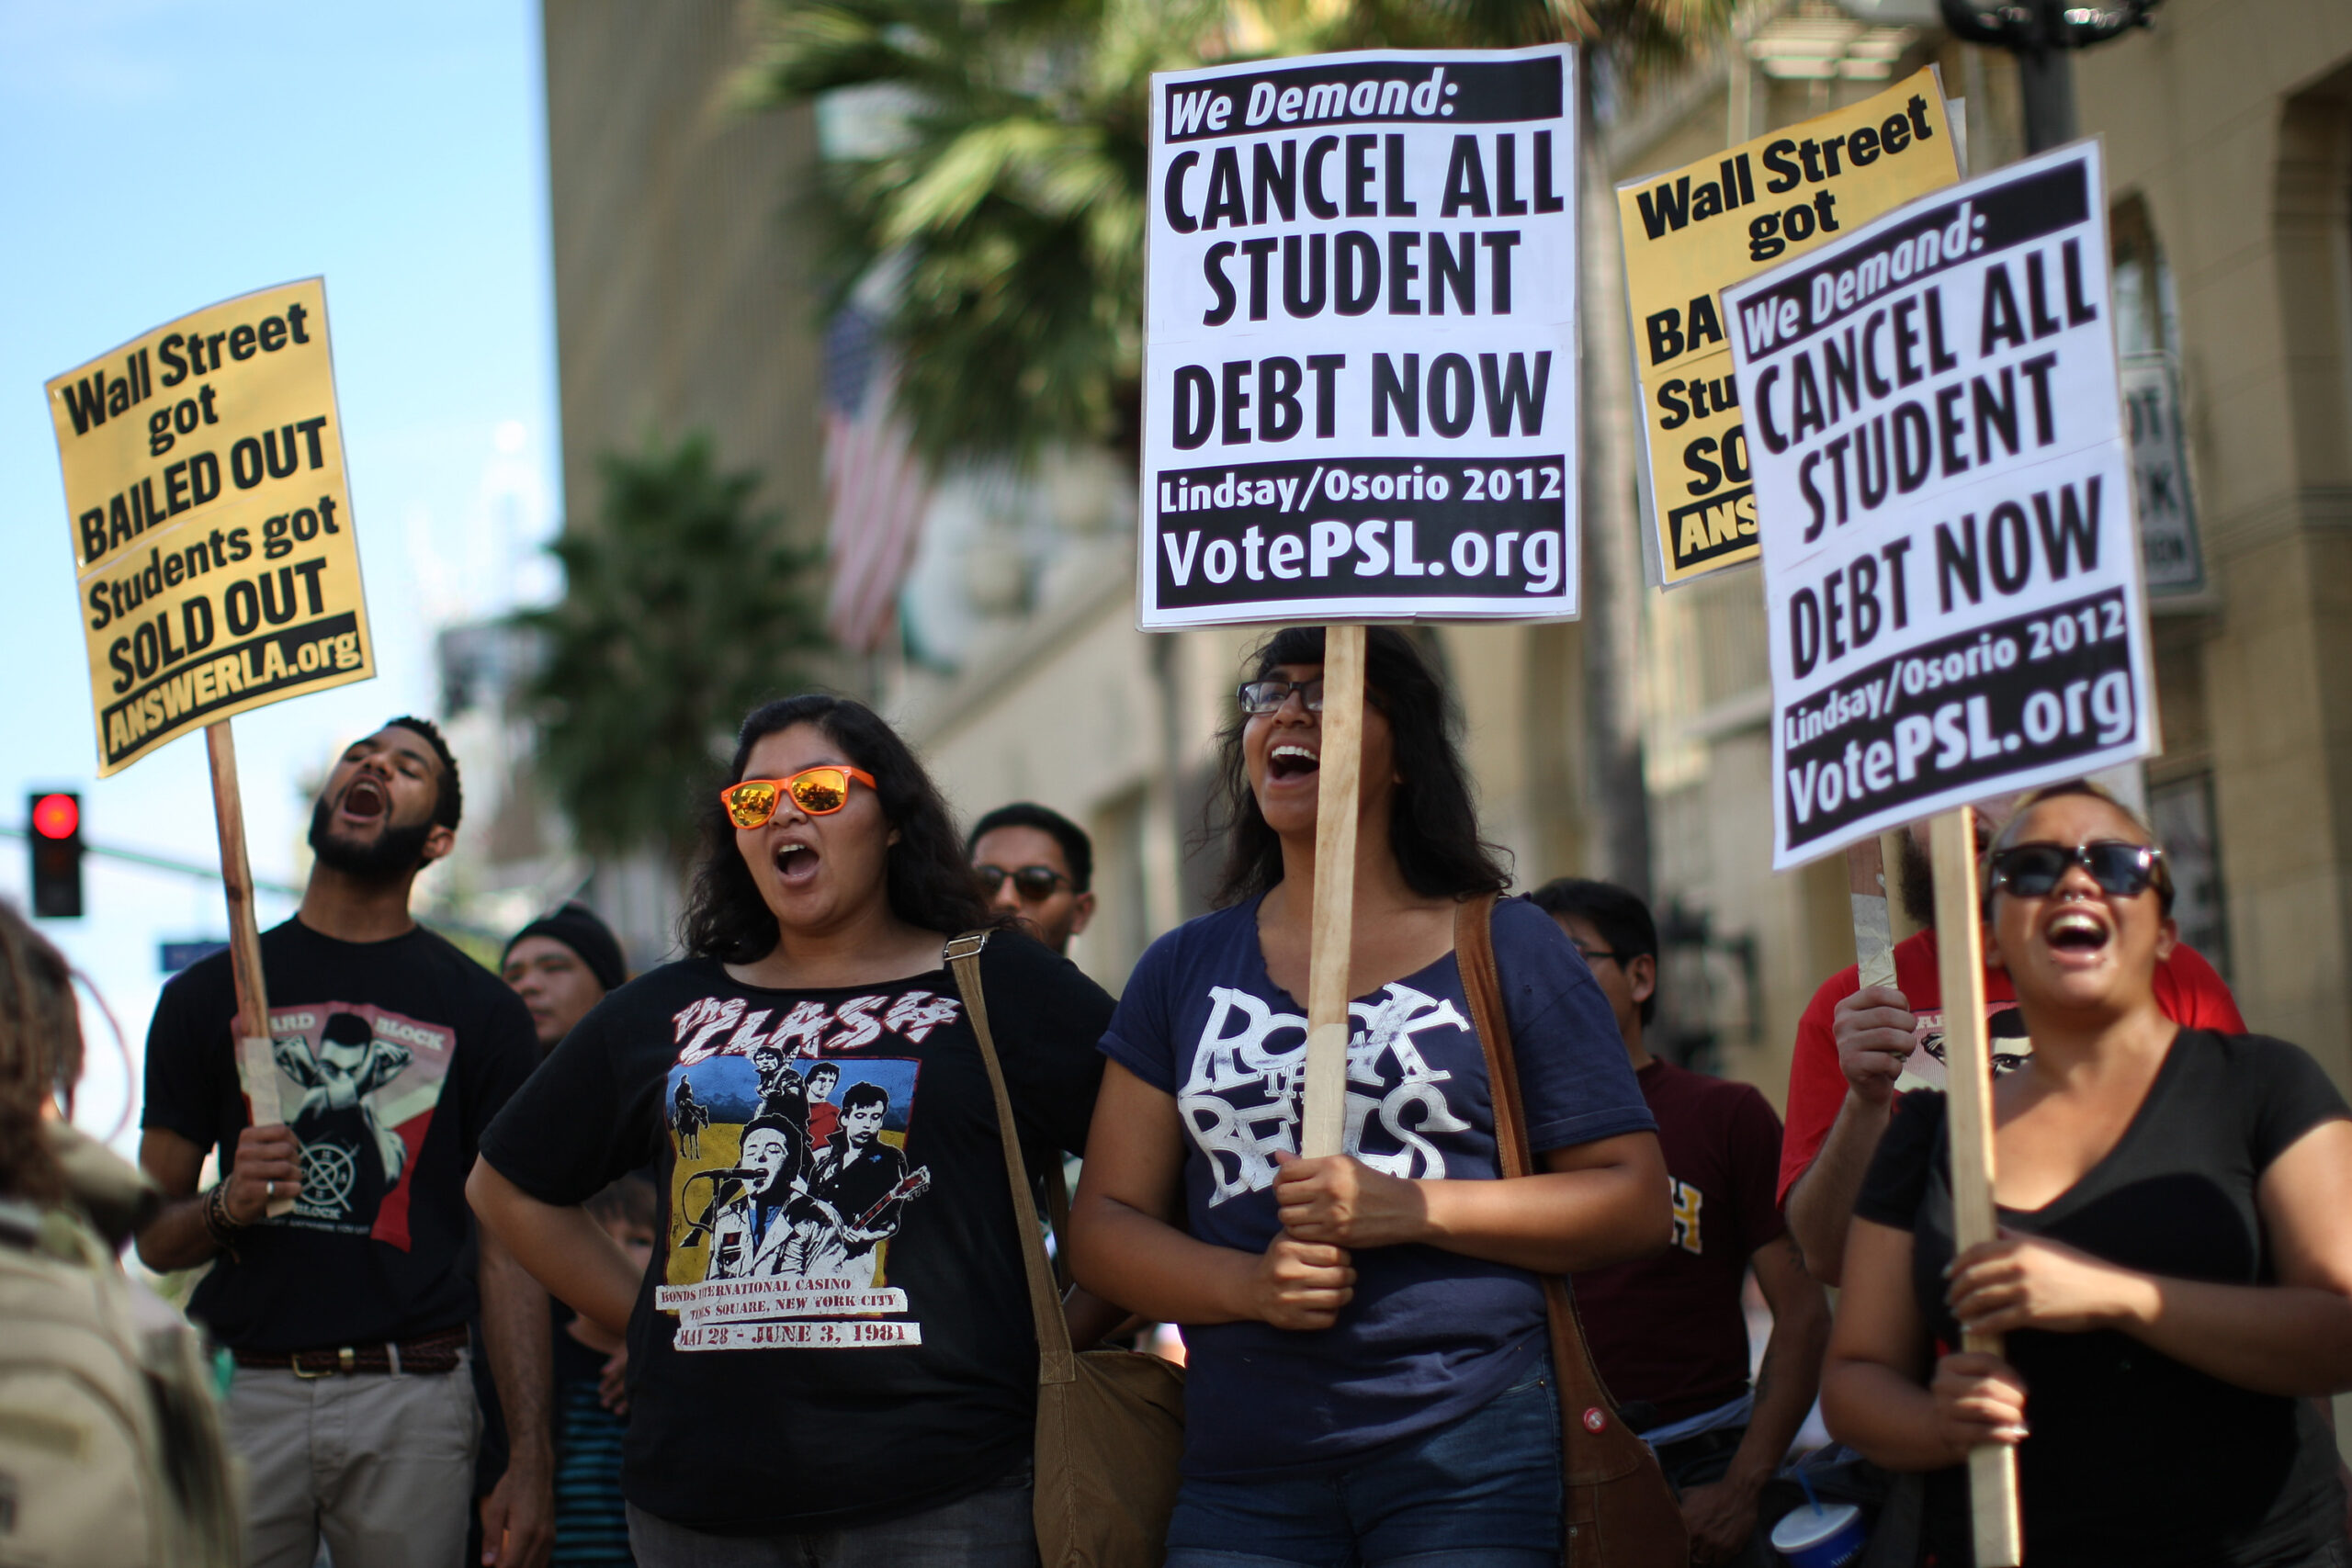 Students protest the rising costs of student loans for higher education in the Hollywood section of Los Angeles, California.